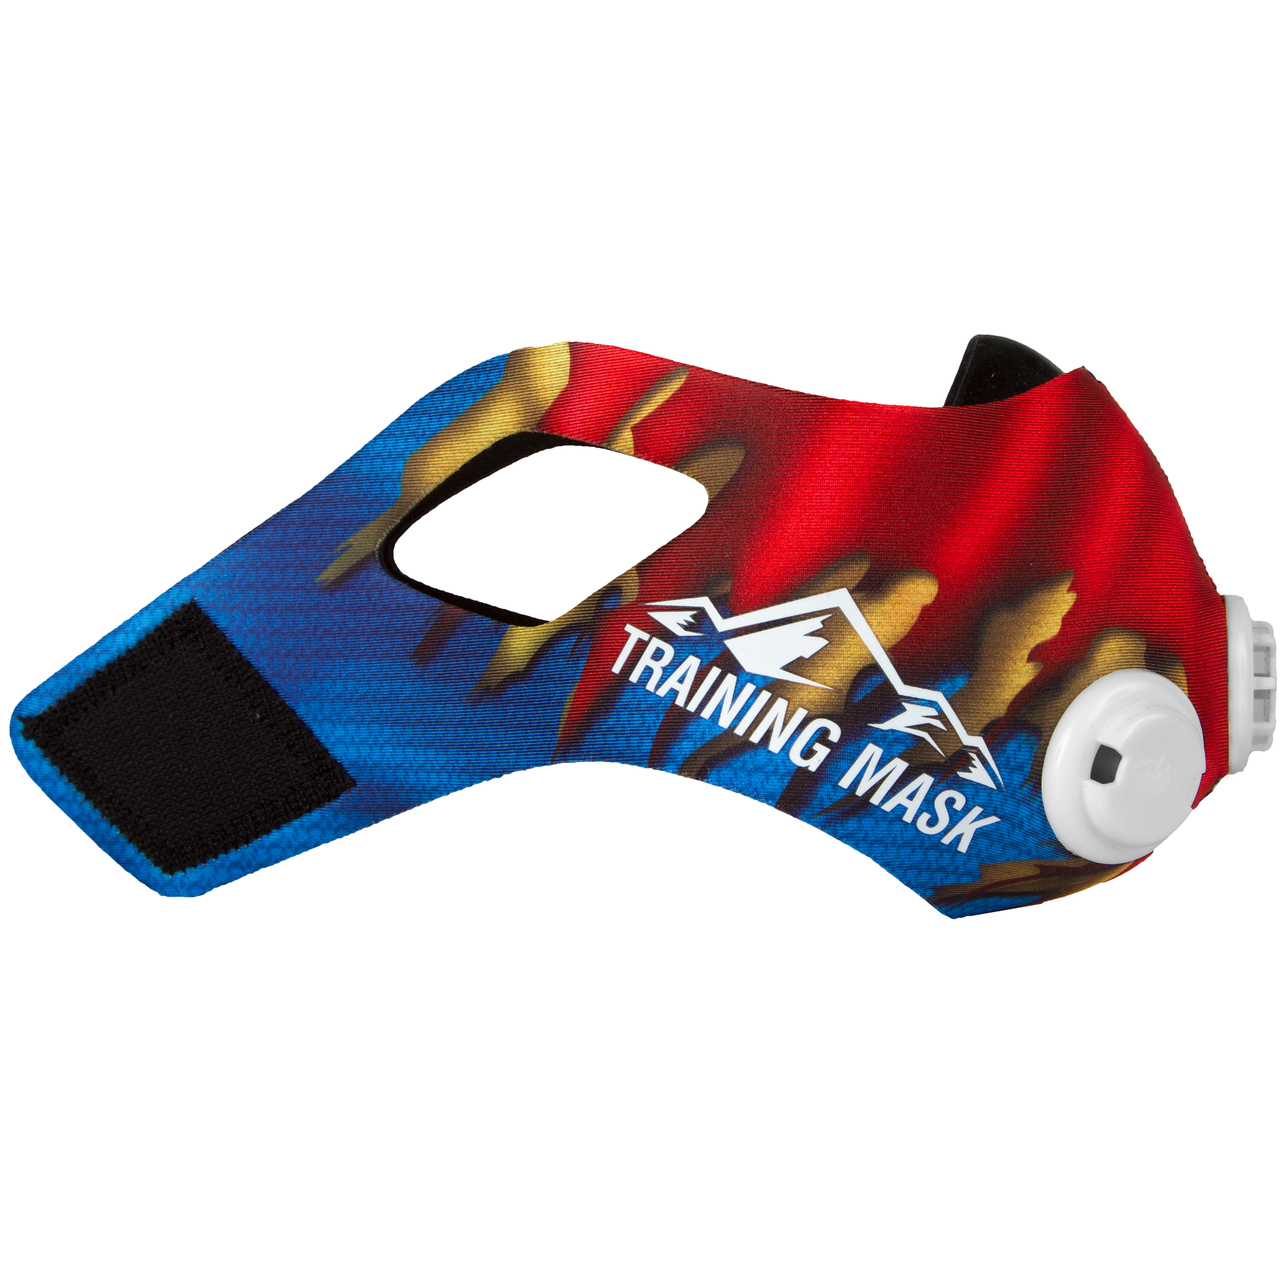 Performance Red Training Tape